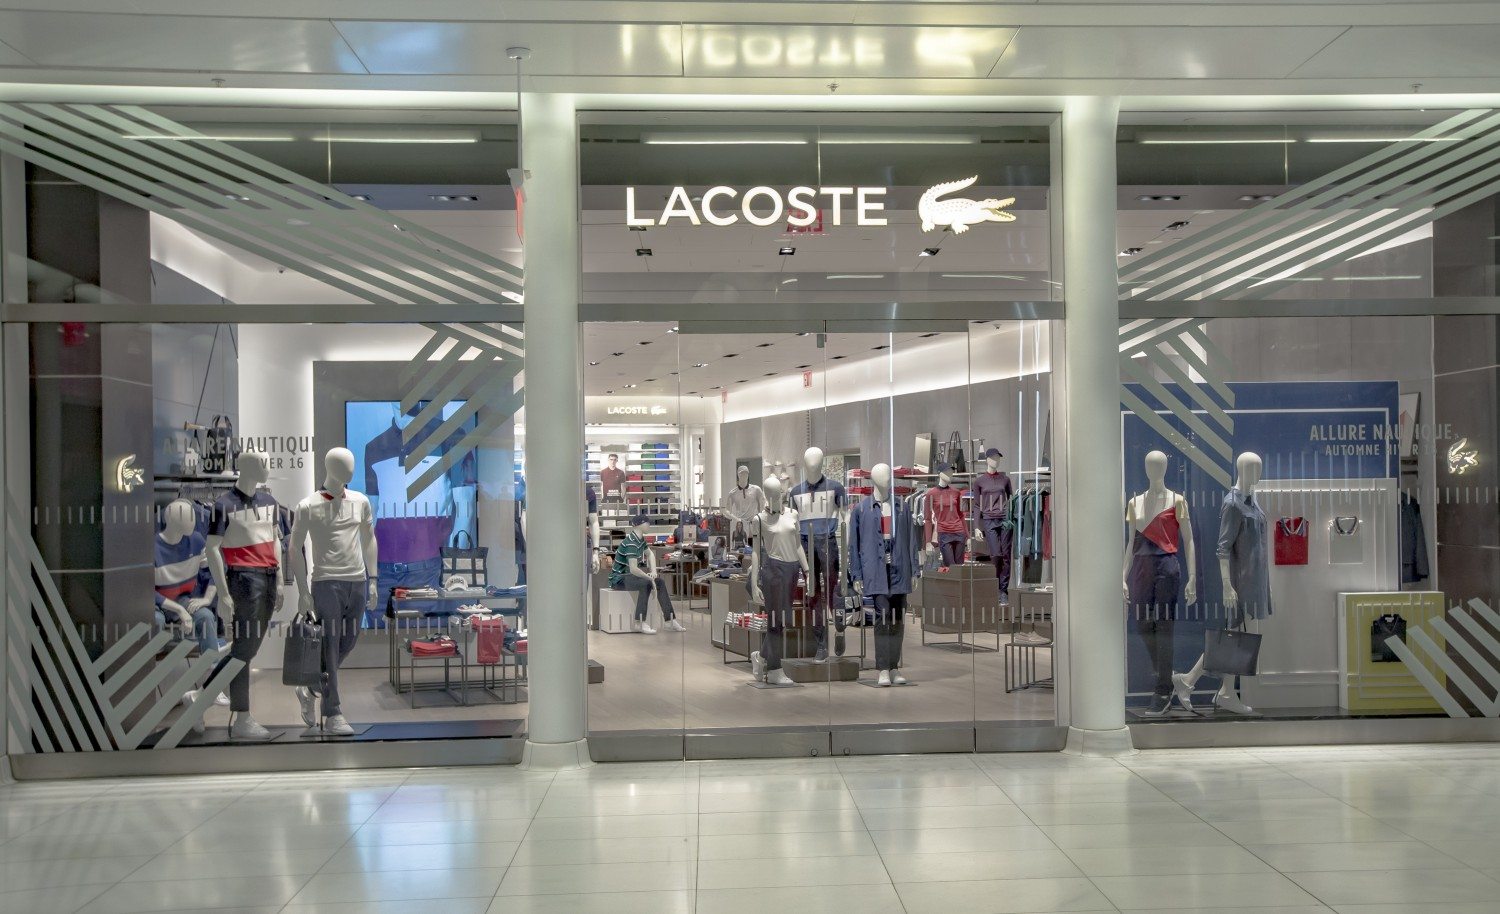 LACOSTE’s “L Comme Légende, L Comme LACOSTE” Exhibition On Display At Westfield WTC Through Sept. 5